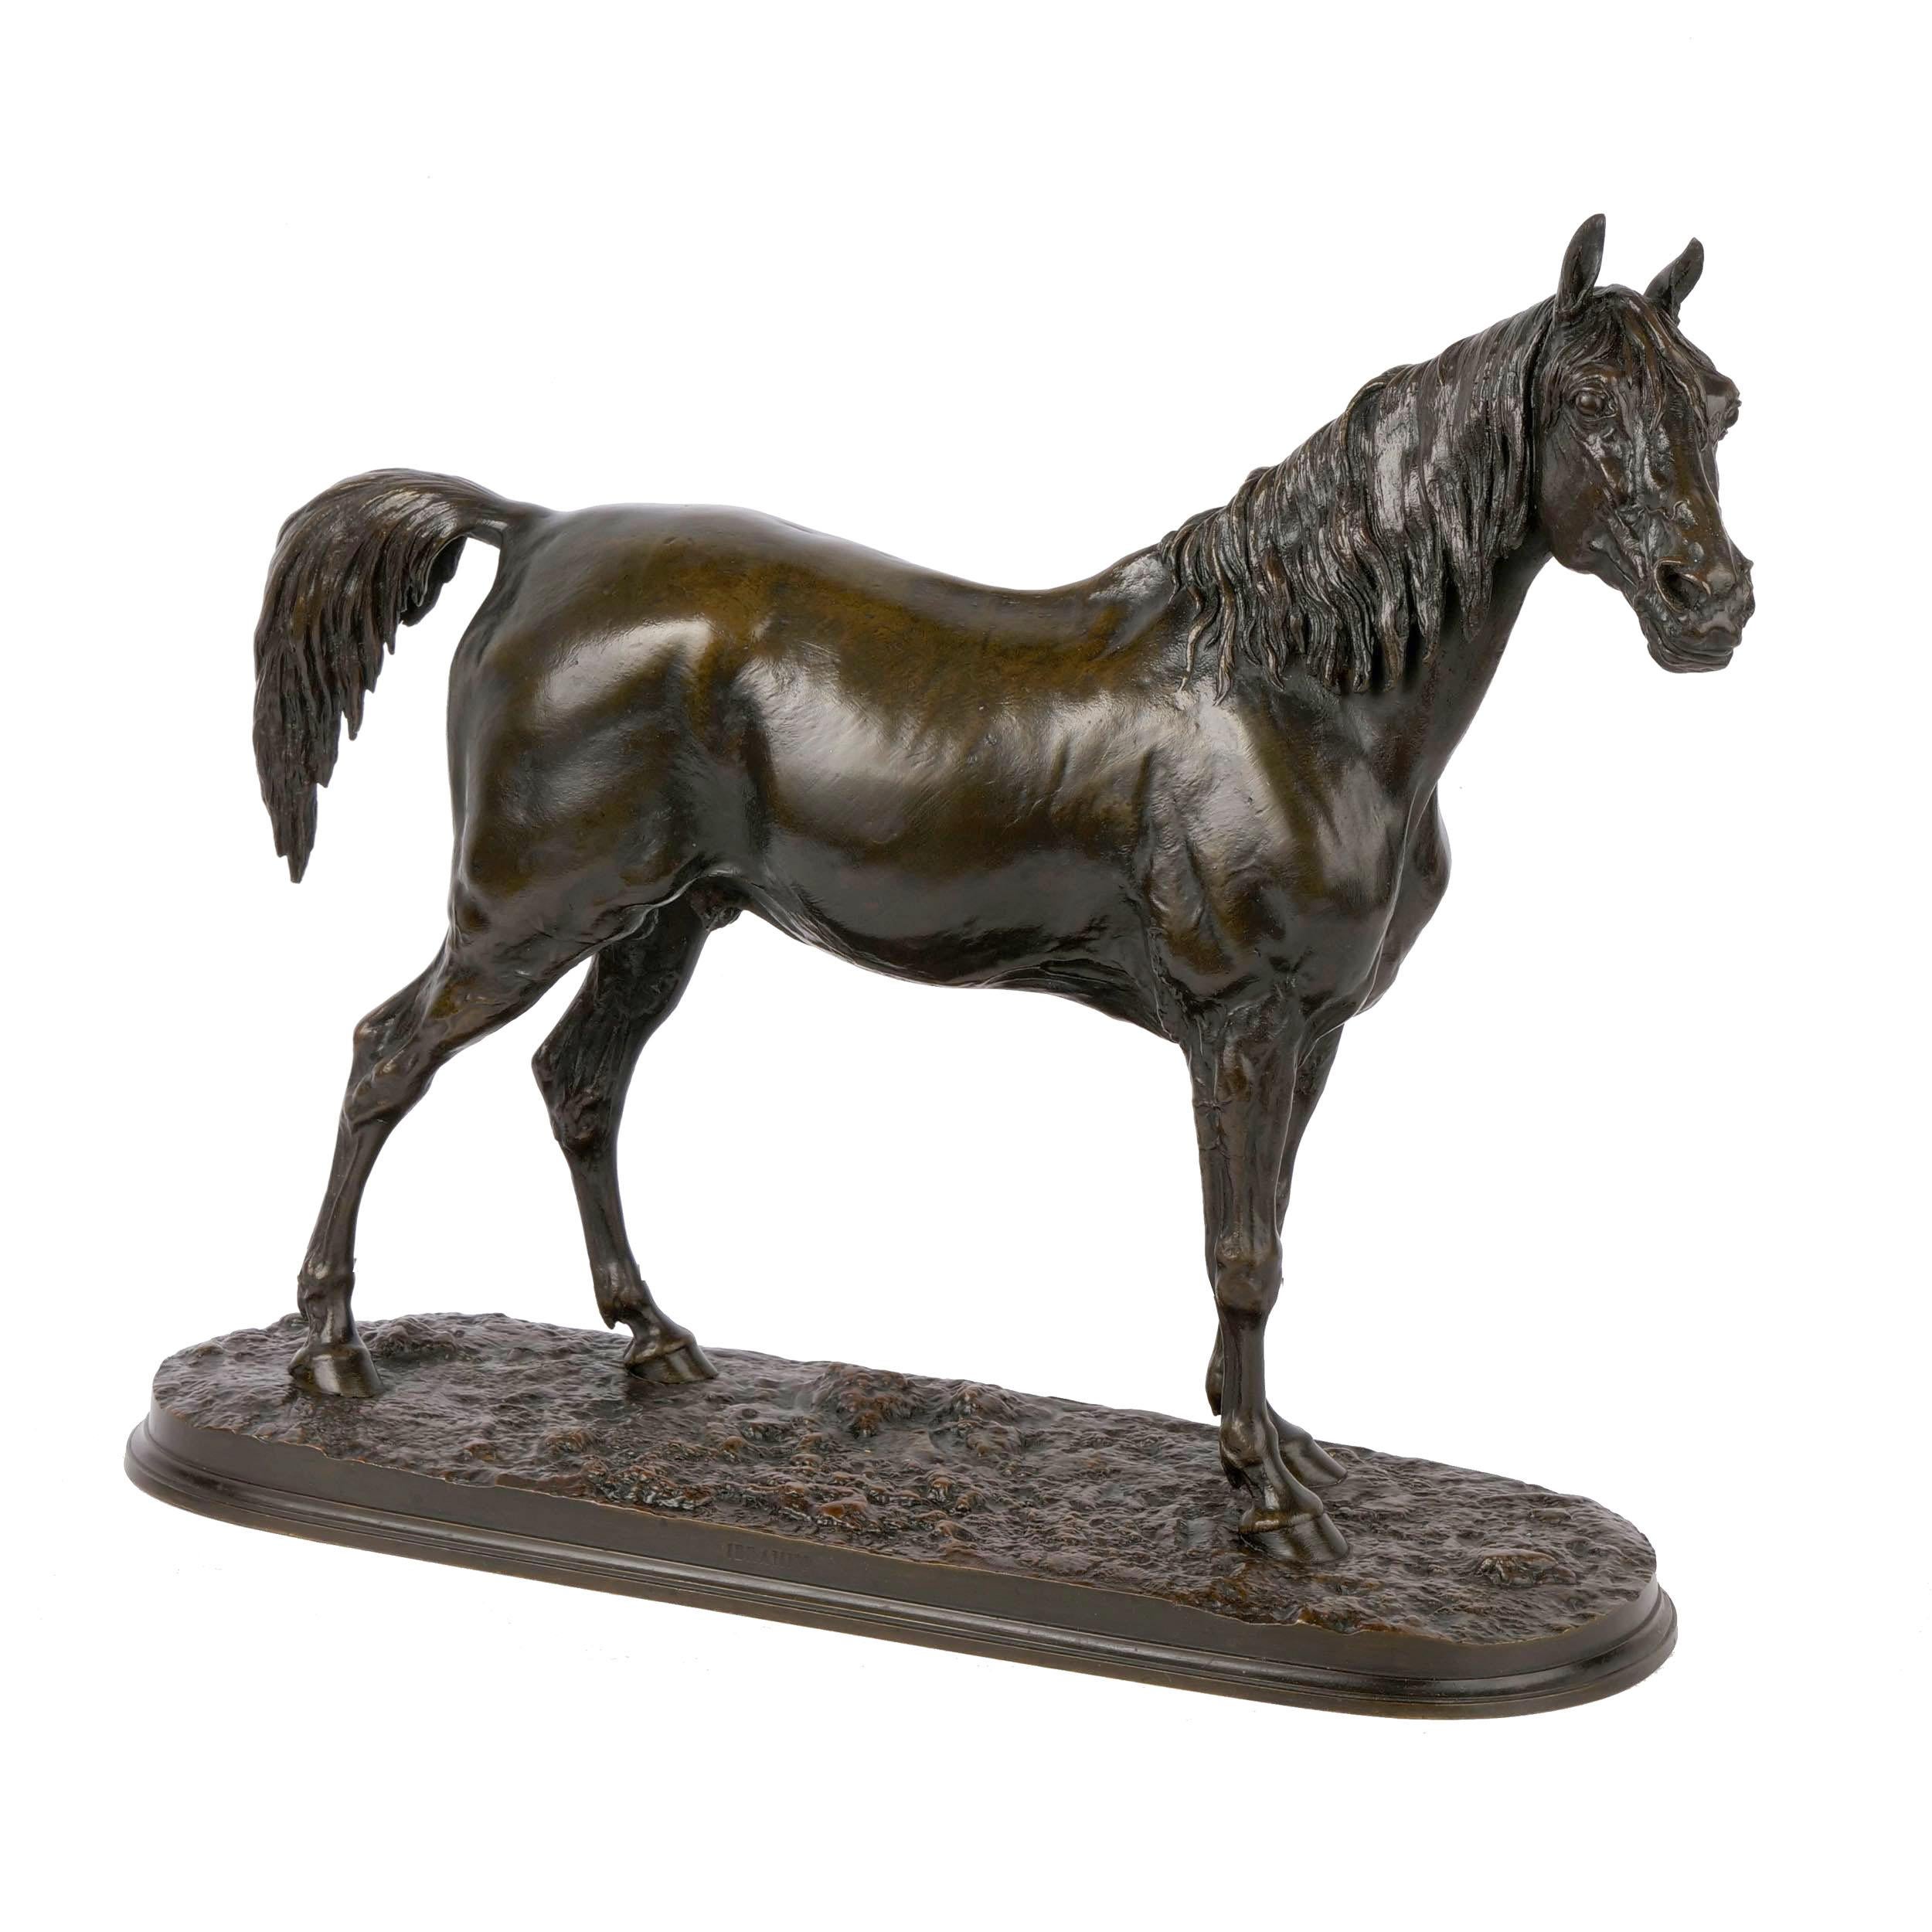 This very handsome sculpture of Ibrahim - Cheval Arabe Ramené d'Egypte is a very fine casting after the model by Pierre Jules Mene depicting the Arabian stallion winner of the French Derby. Originally modeled in 1843 and exhibited at Salon the same